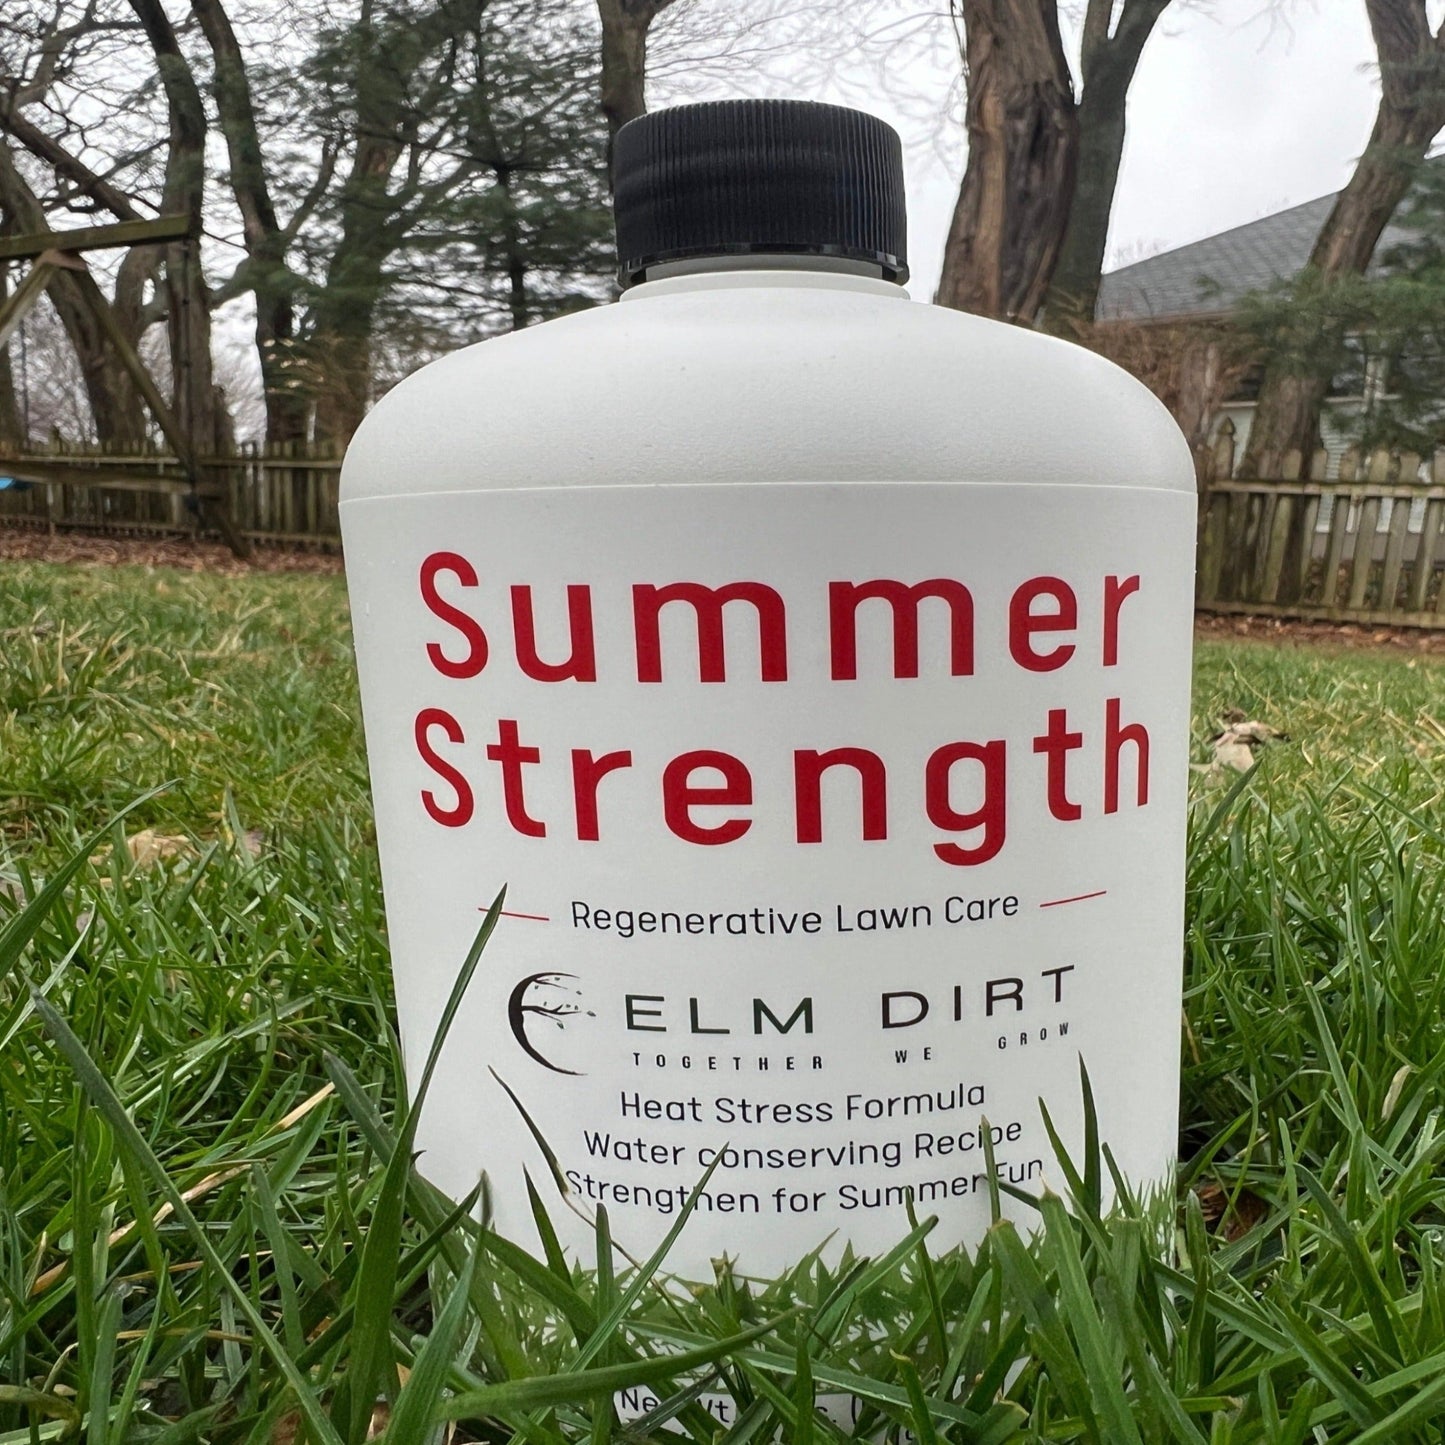 Yearly Regenerative and Sustainable Lawn Care by Elm Dirt